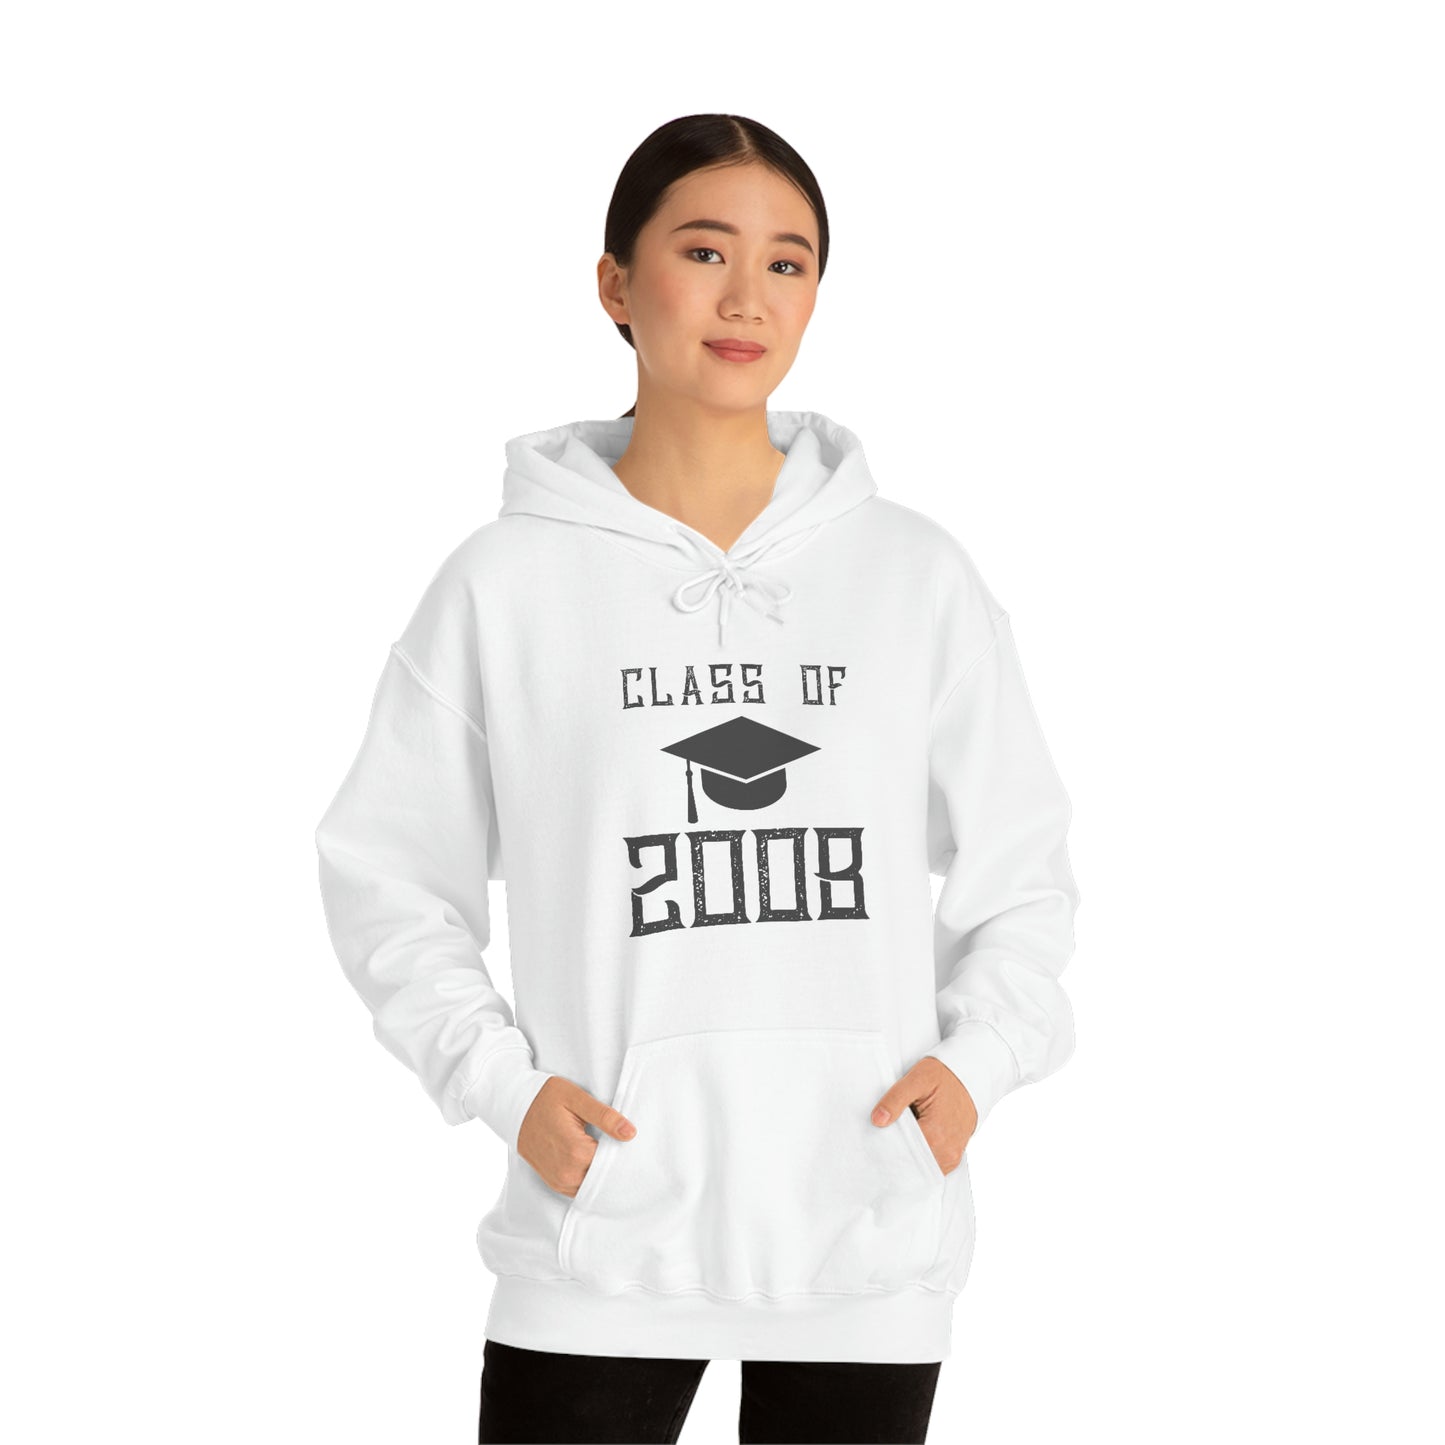 "Class Of 2008" Hoodie - Weave Got Gifts - Unique Gifts You Won’t Find Anywhere Else!